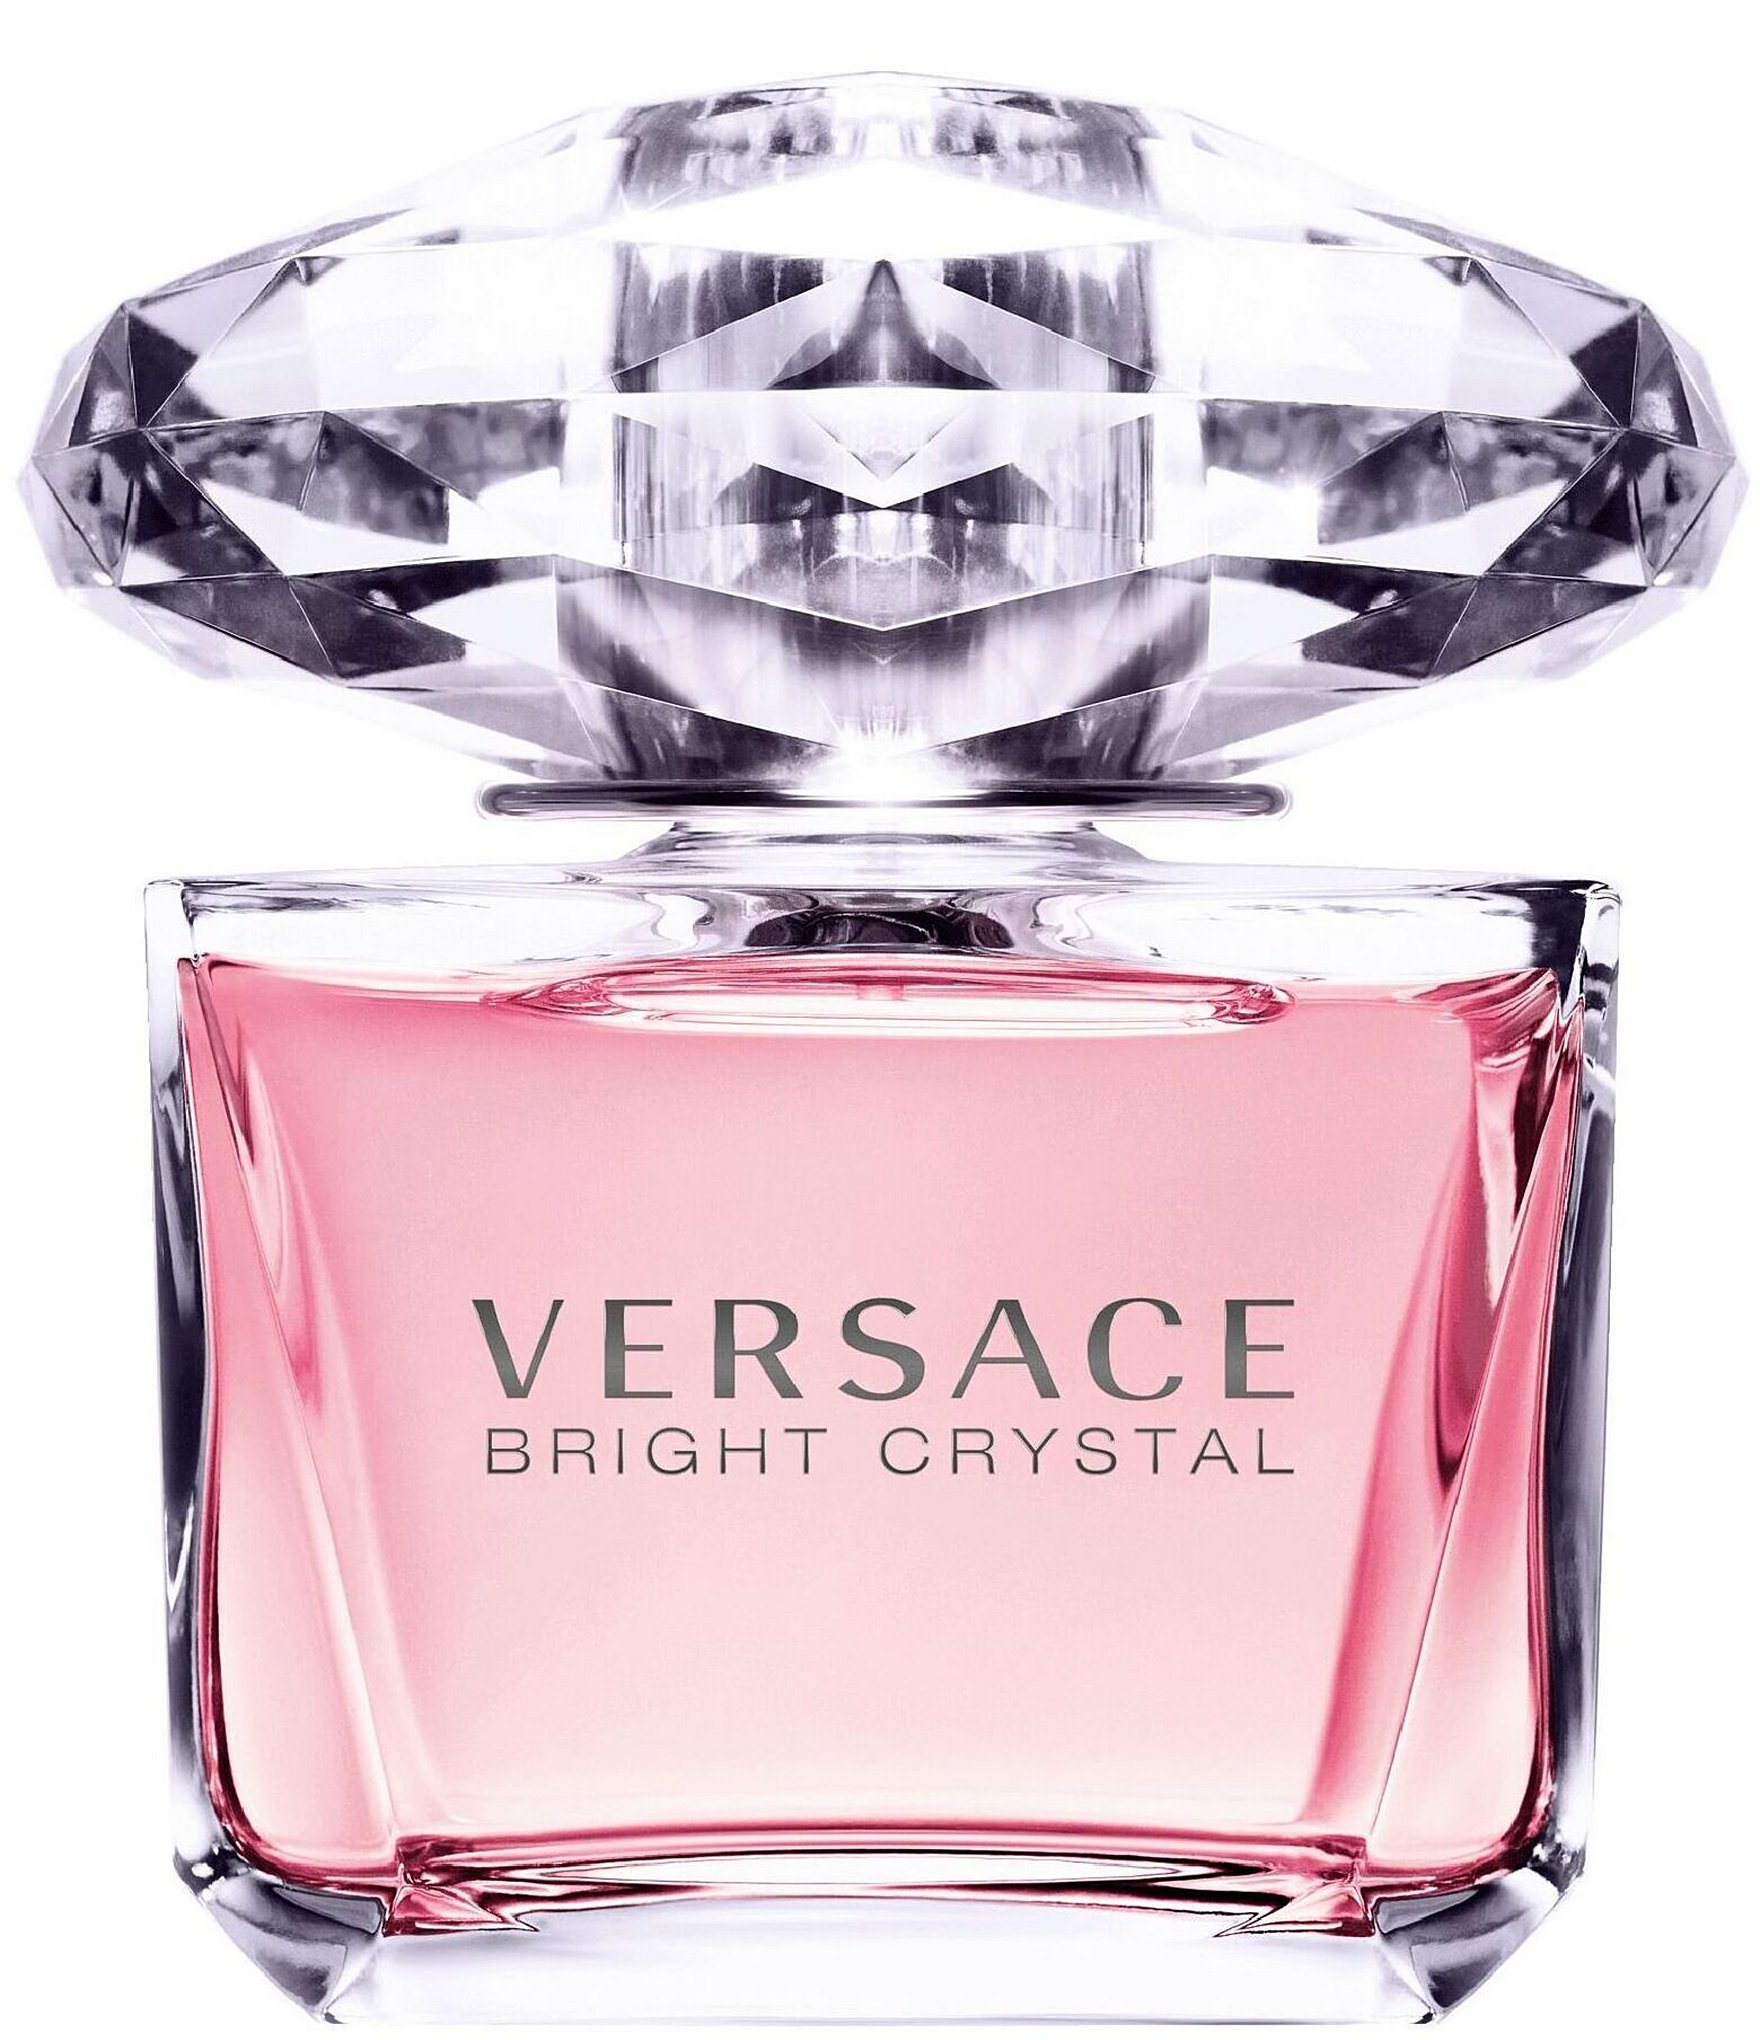 Versace Bright Crystal Eau de Toilette for Women SweetCare United States